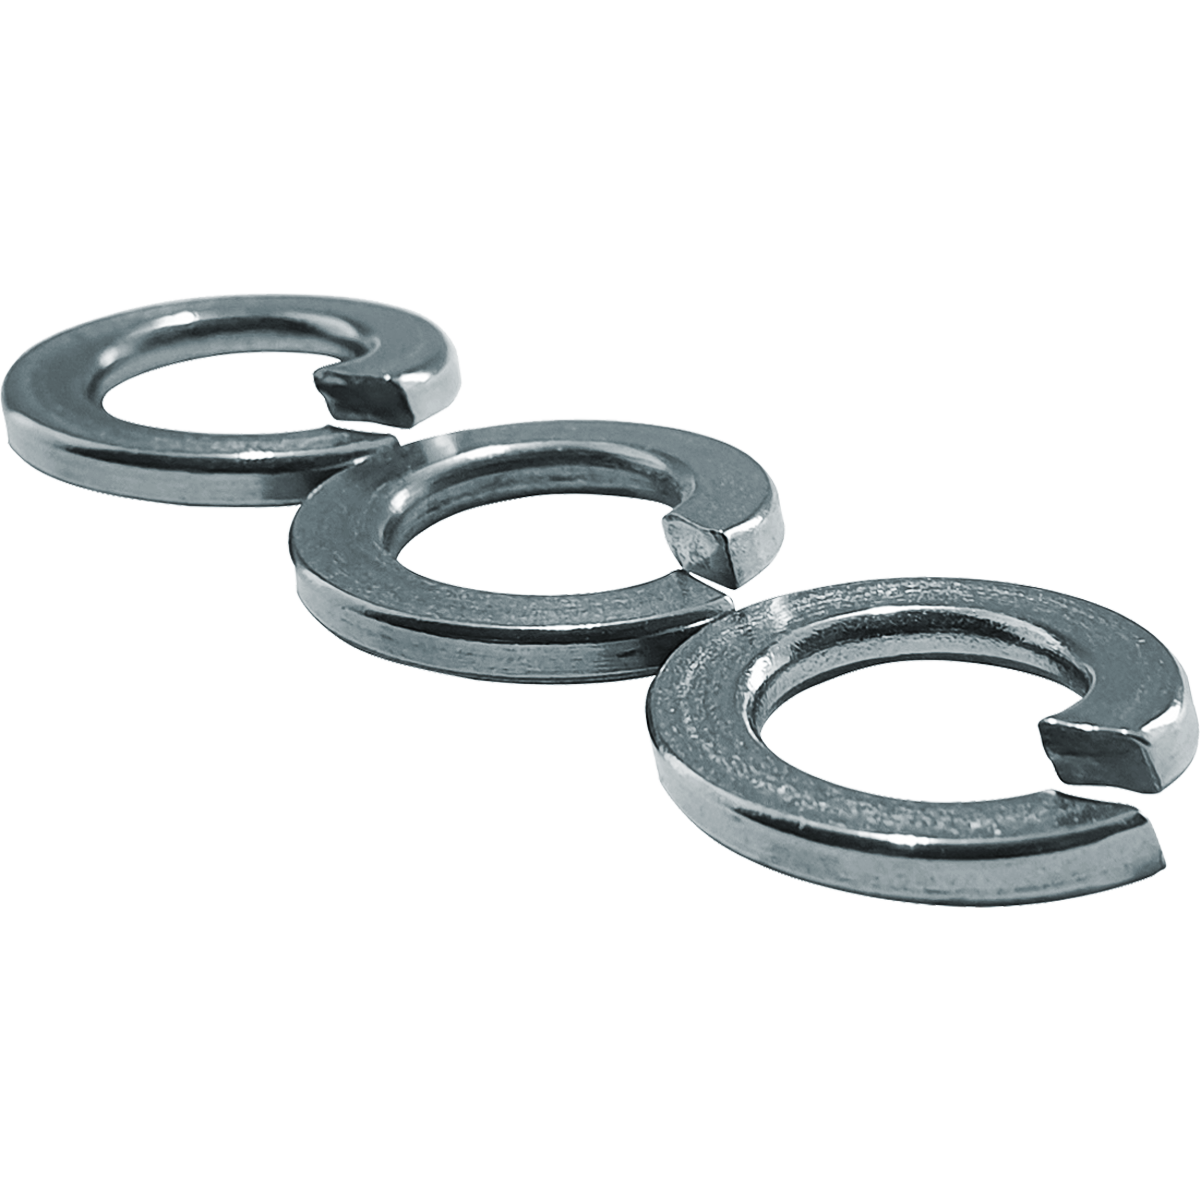 Metric, rectangular Spring Washers, manufactured from grade 4.6 steel with a bright zinc plating (BZP)